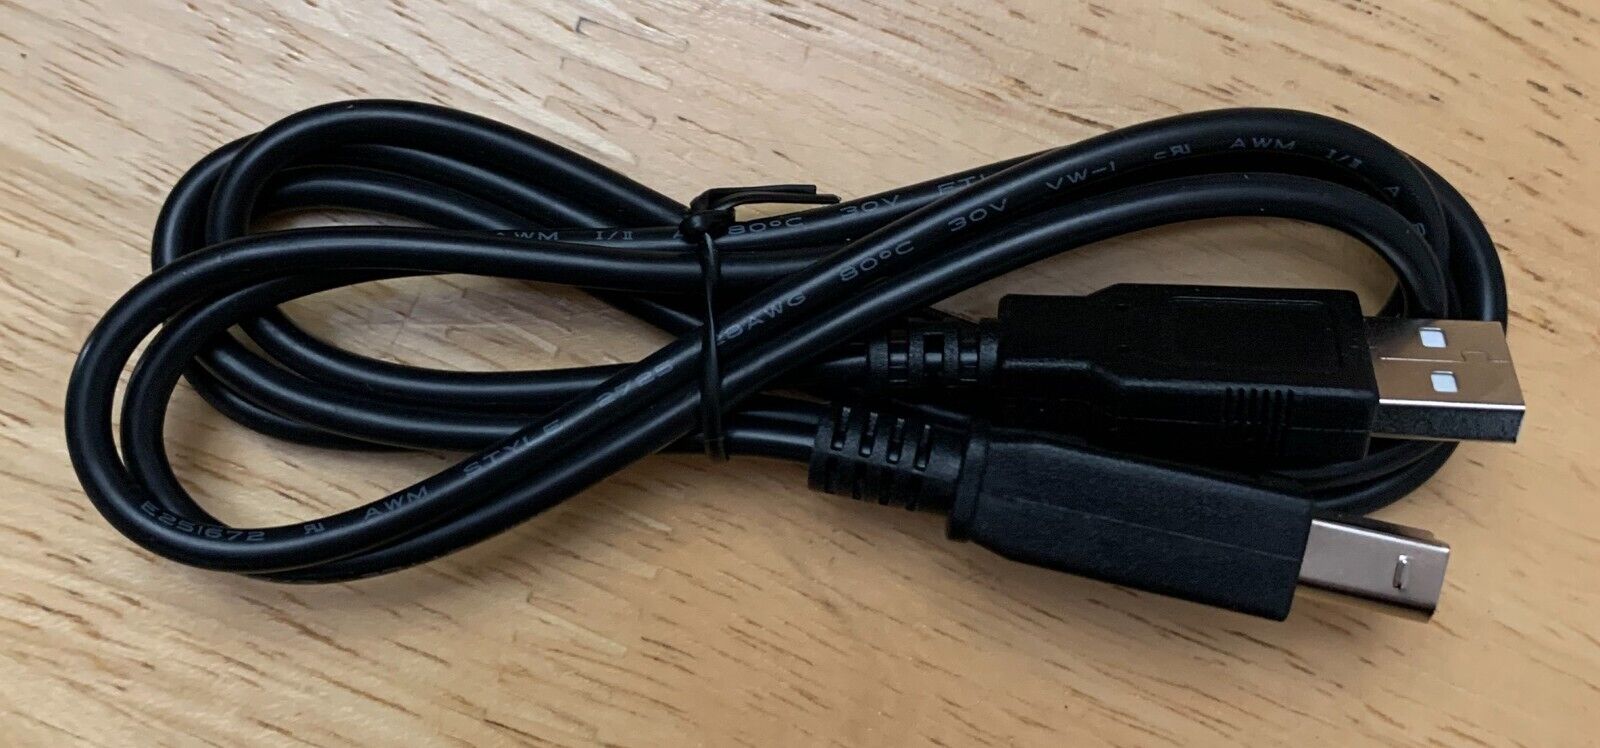 TRIPP LITE 3ft Reversible USB 2.0 Cable (A Male to B Male) in Black